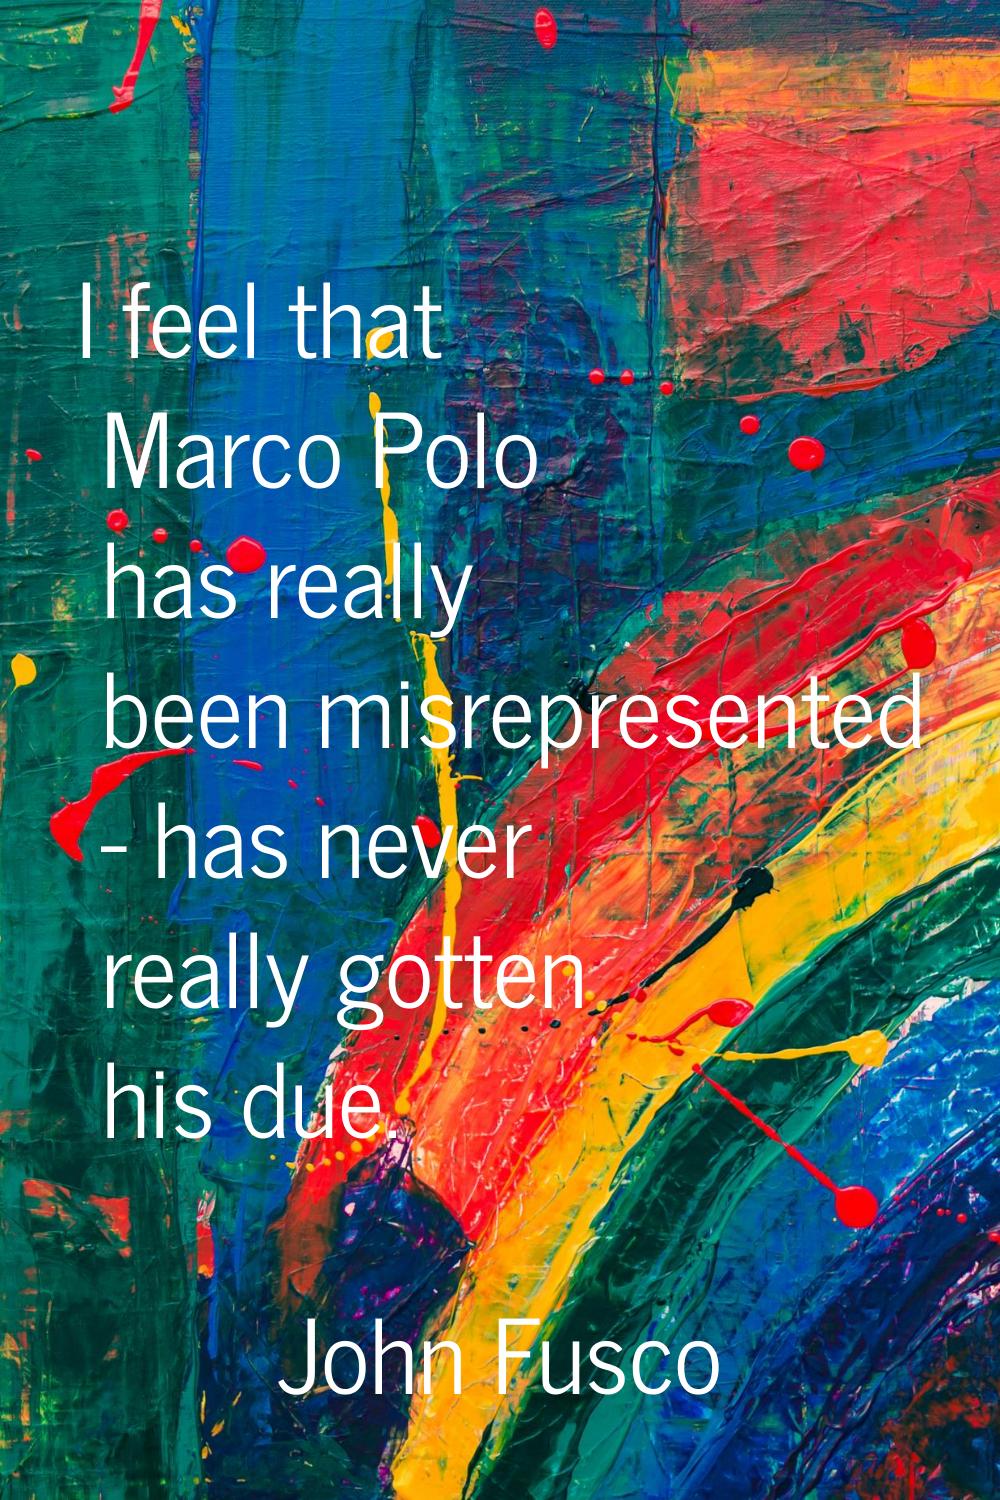 I feel that Marco Polo has really been misrepresented - has never really gotten his due.